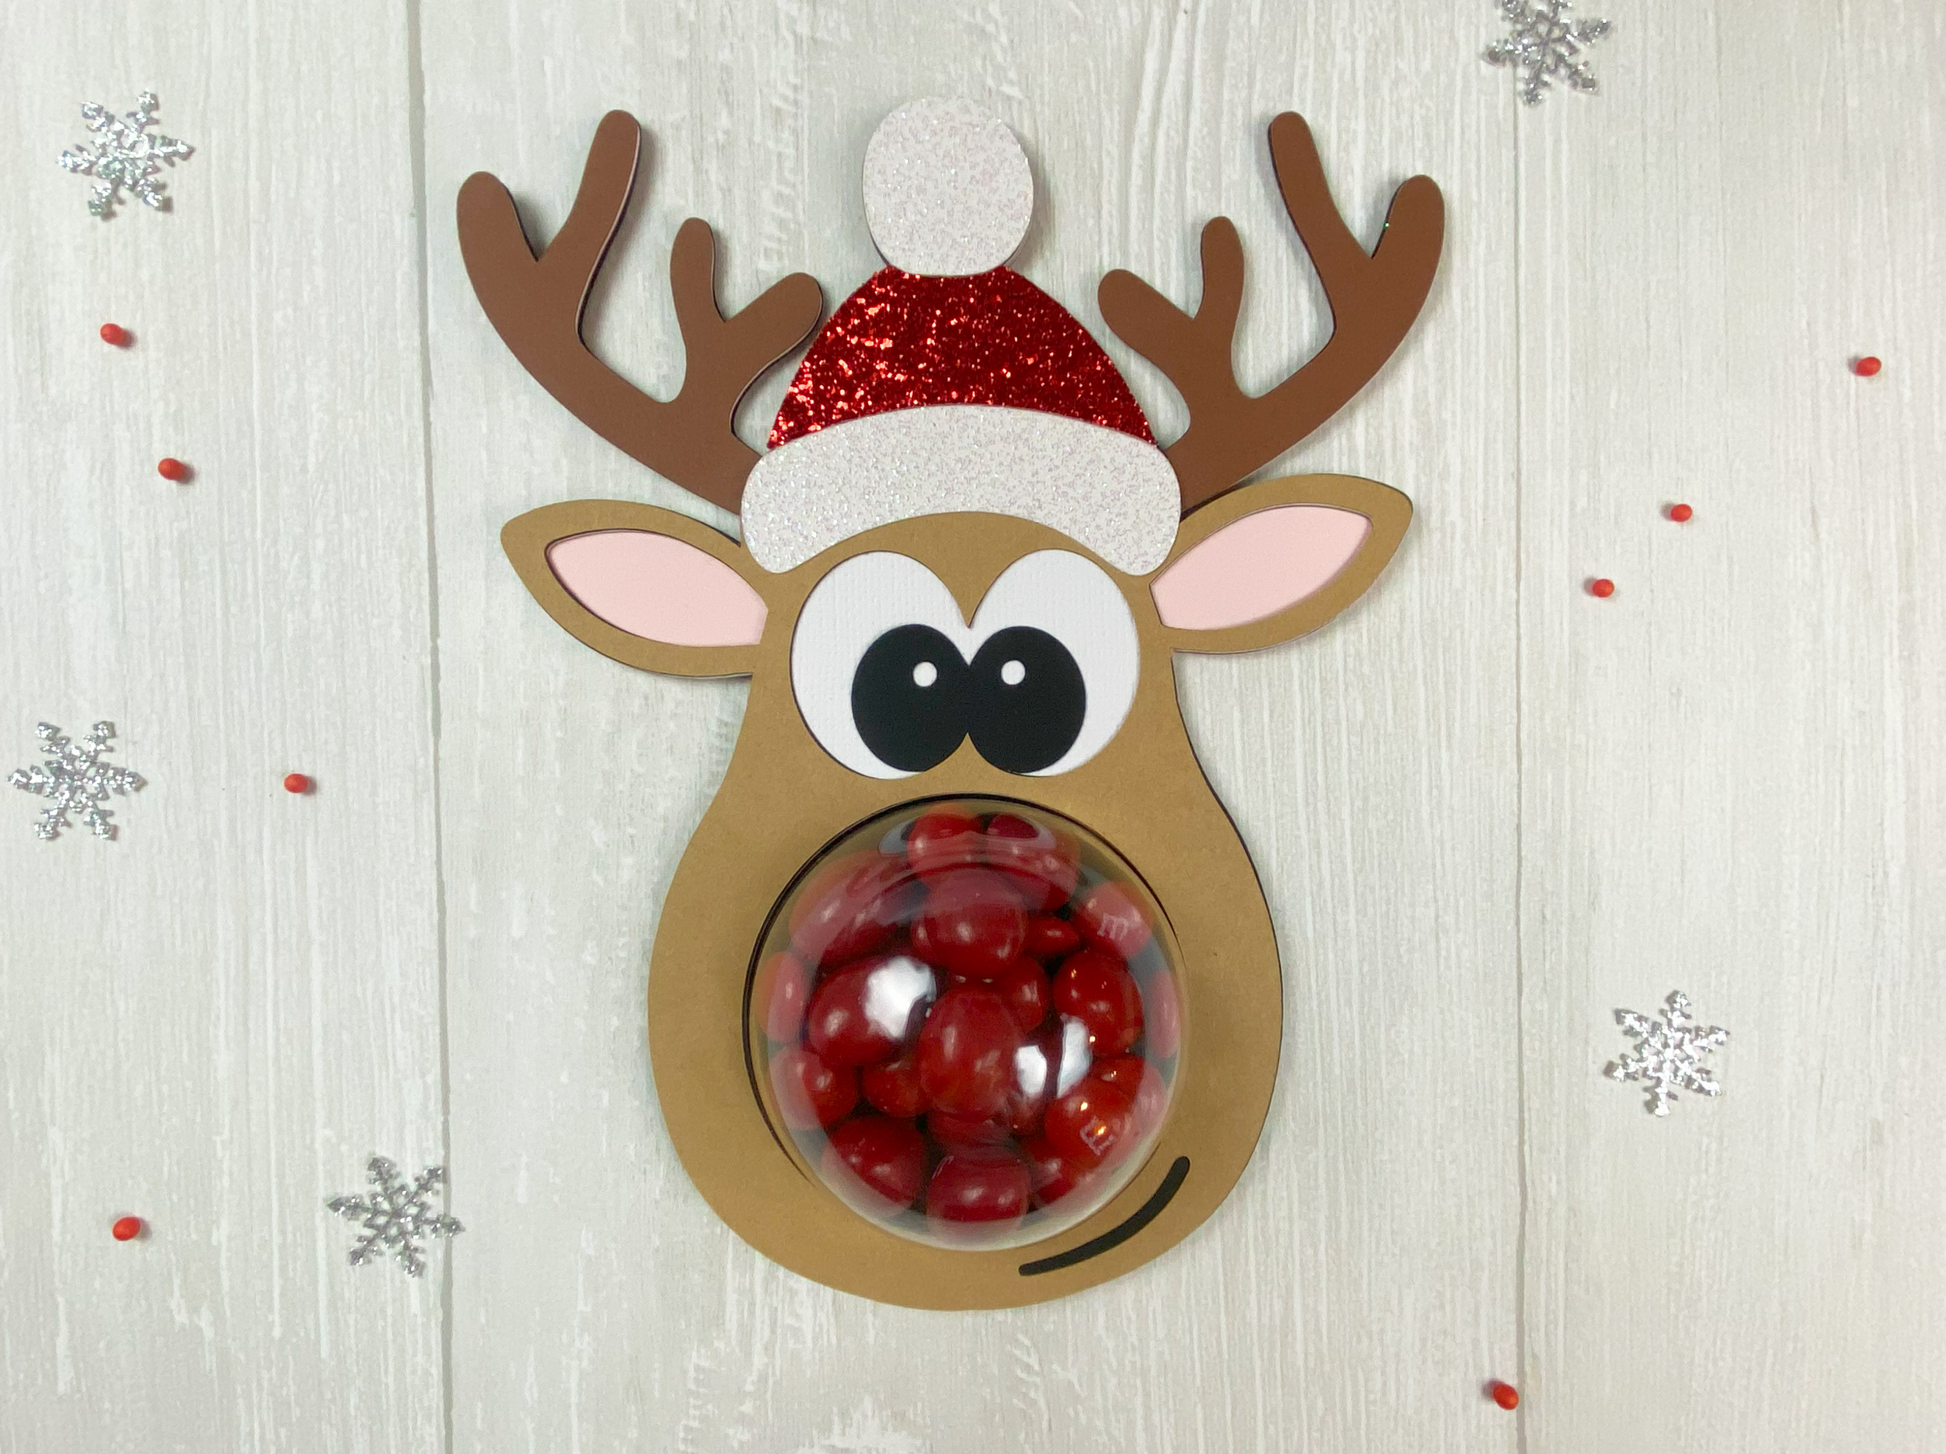 Rudolph the red nosed reindeer dome candy holder template for Cricut or Silhouette. Perfect for stocking stuffers, party favors, Christmas gifts.